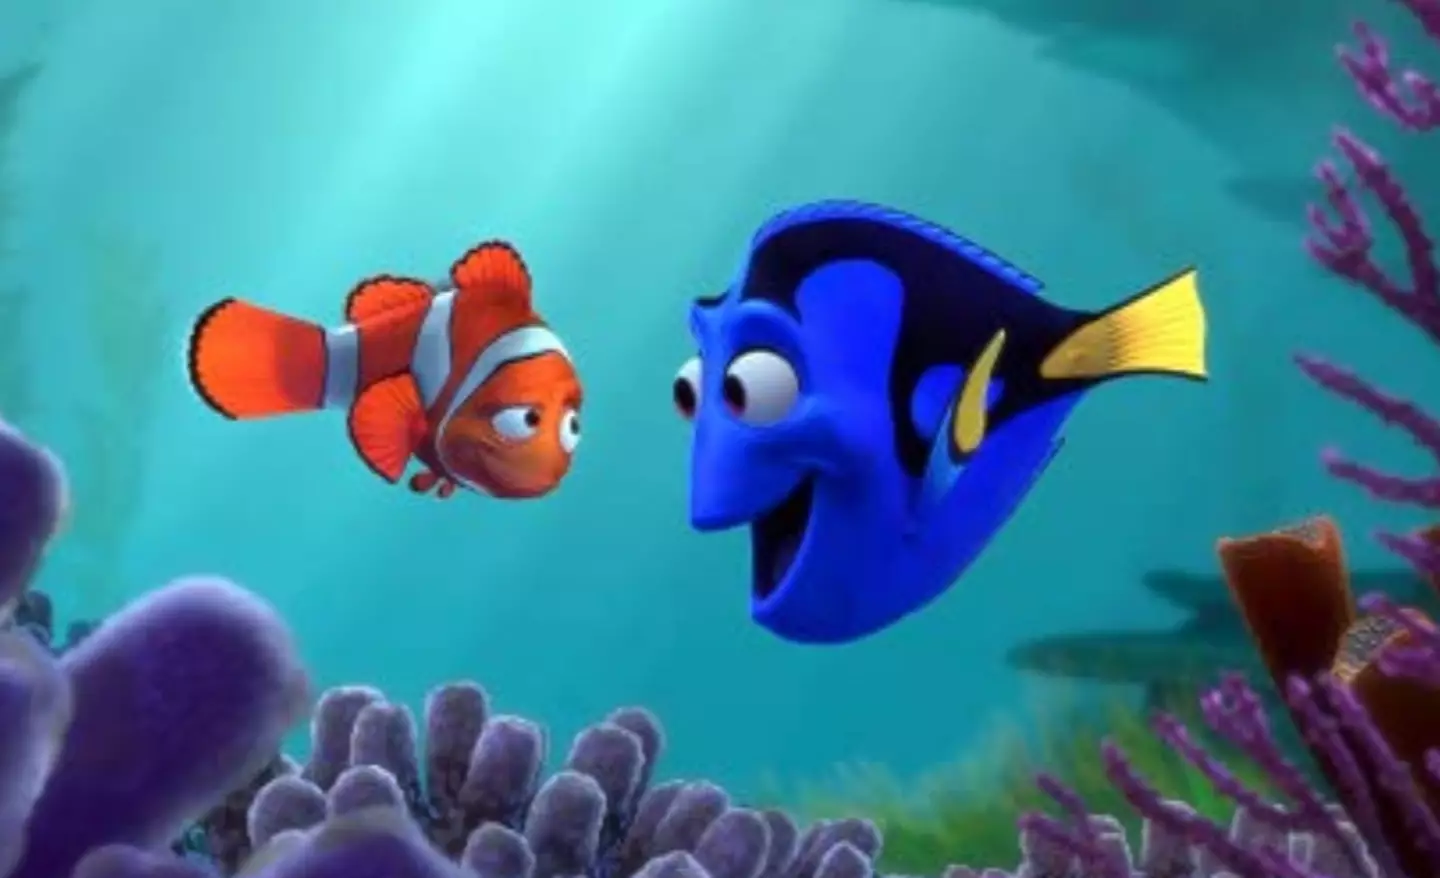 Finding Nemo was followed by the sequel, Finding Dory.